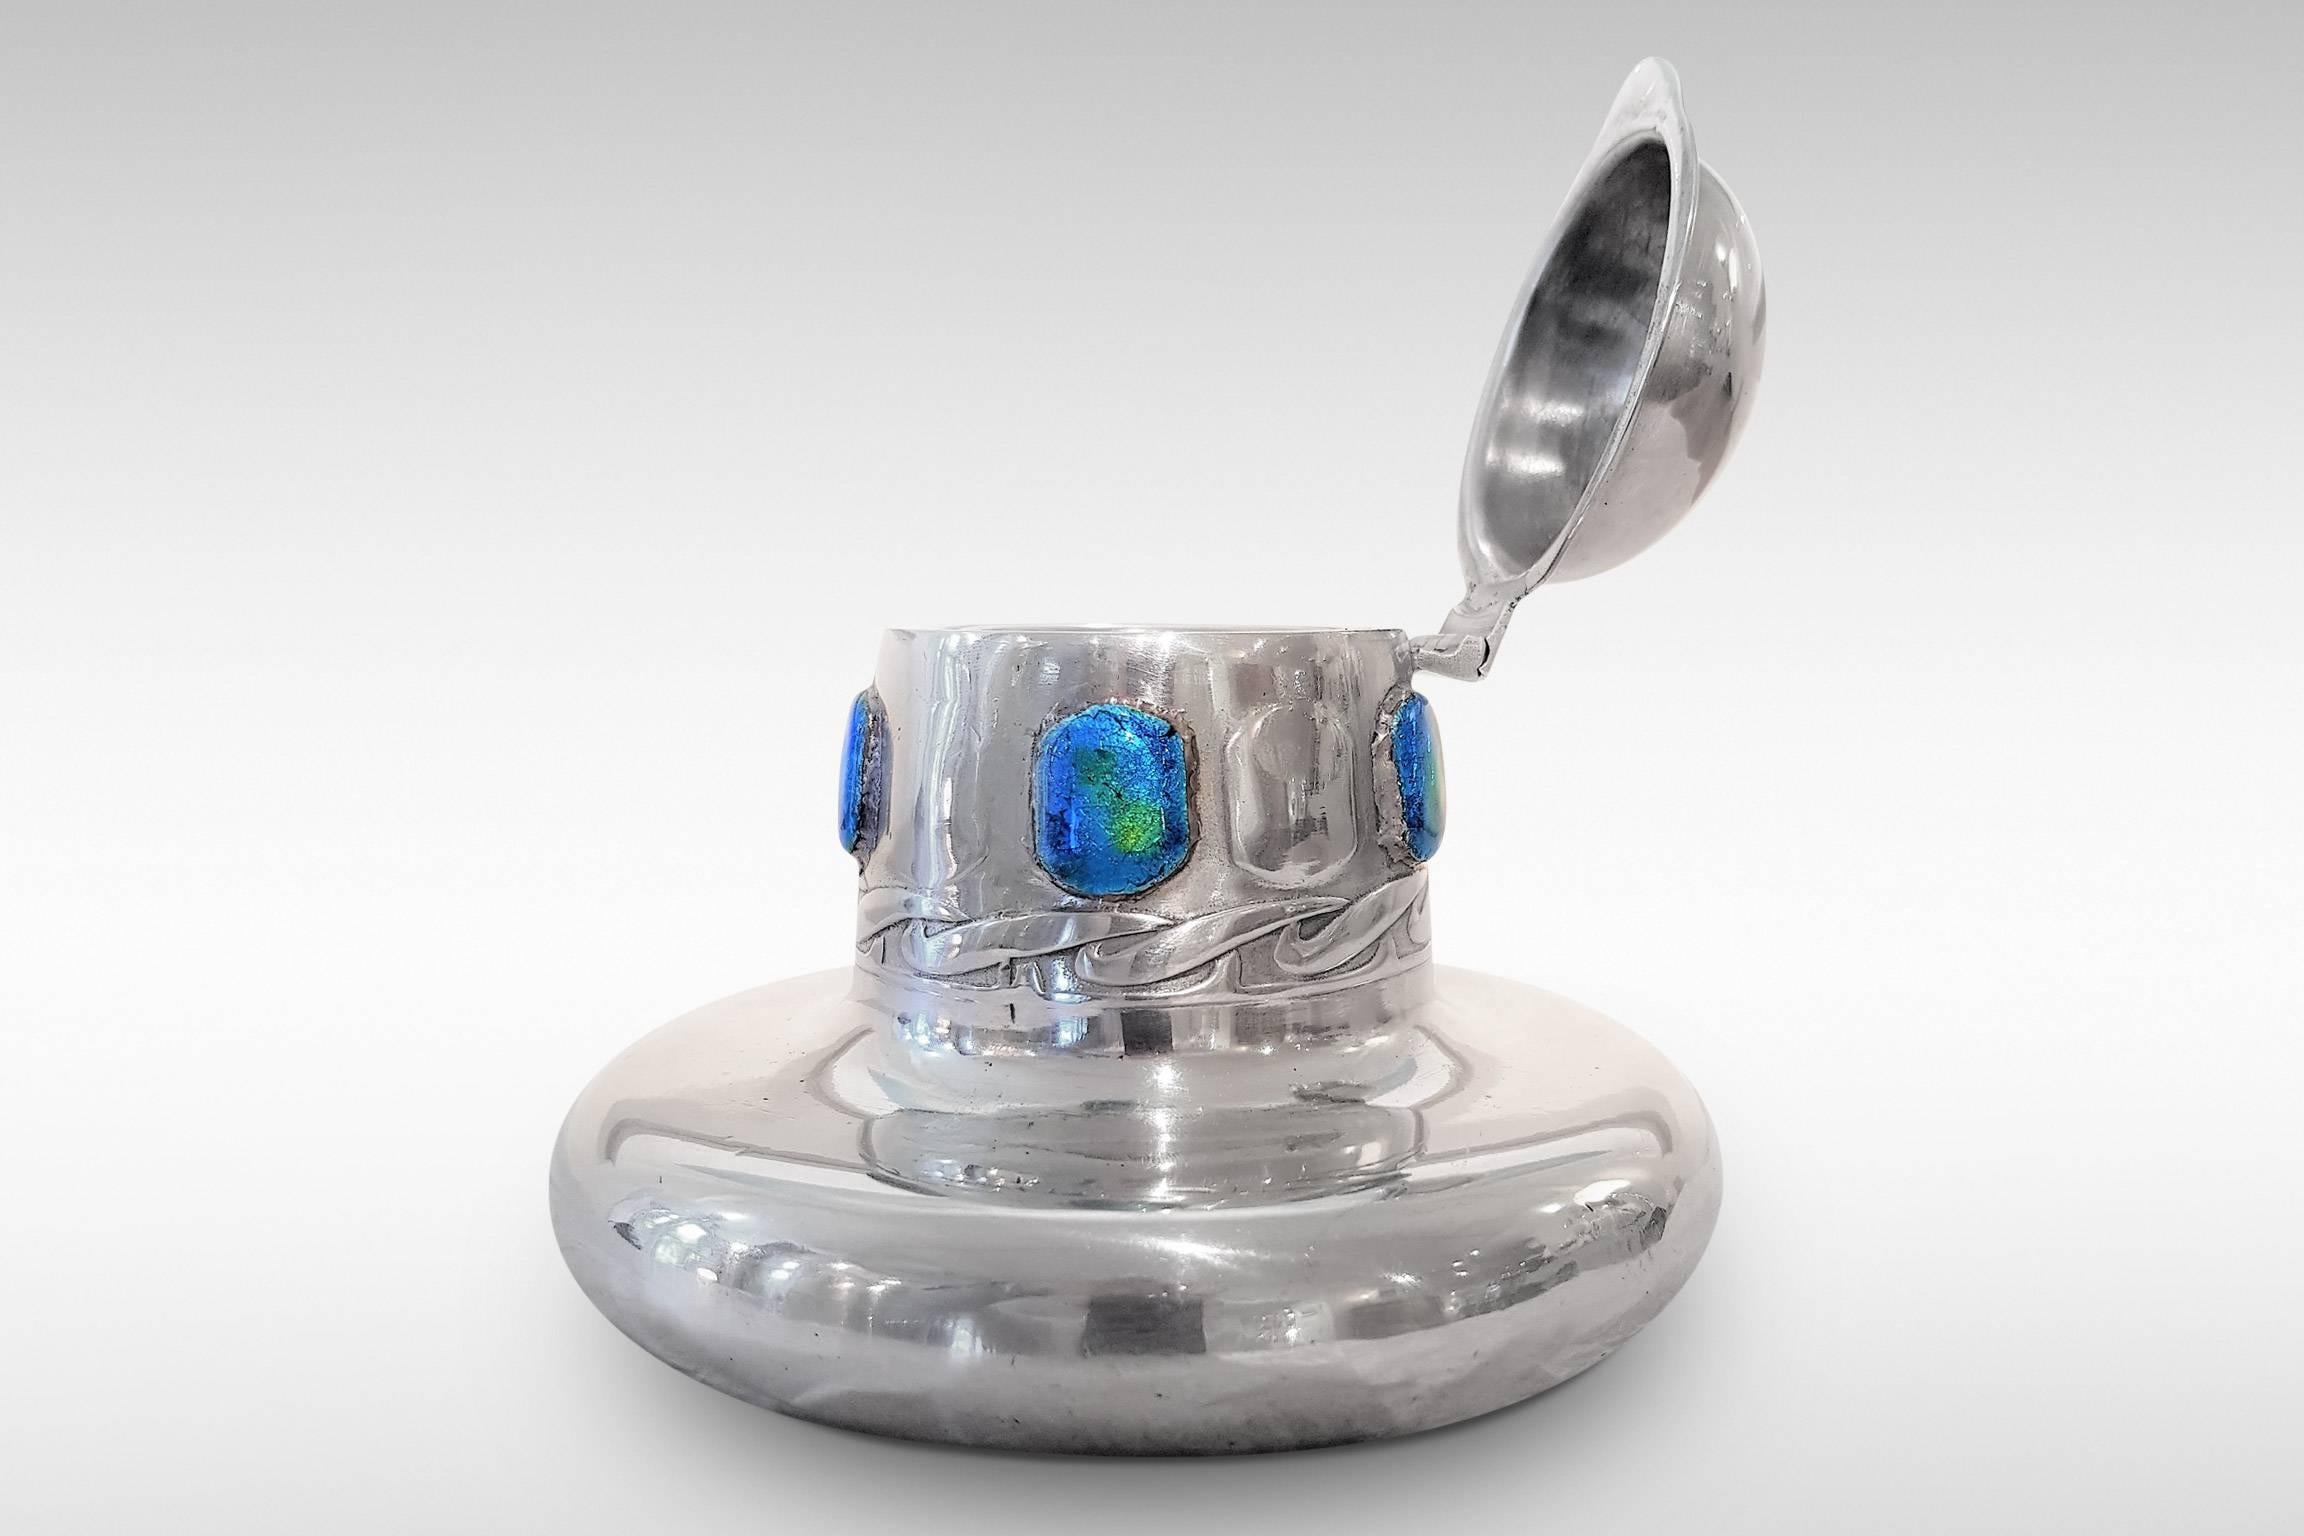 This inkwell in pewter with blue/green enamels was designed Archibald Knox for Liberty and Co's 'Tudric' range of Art Nouveau pewter-ware. It is model 0164 and dates from 1902-1905. Clear glass liner.

Literature: Stephen A Martin, 'Archibald